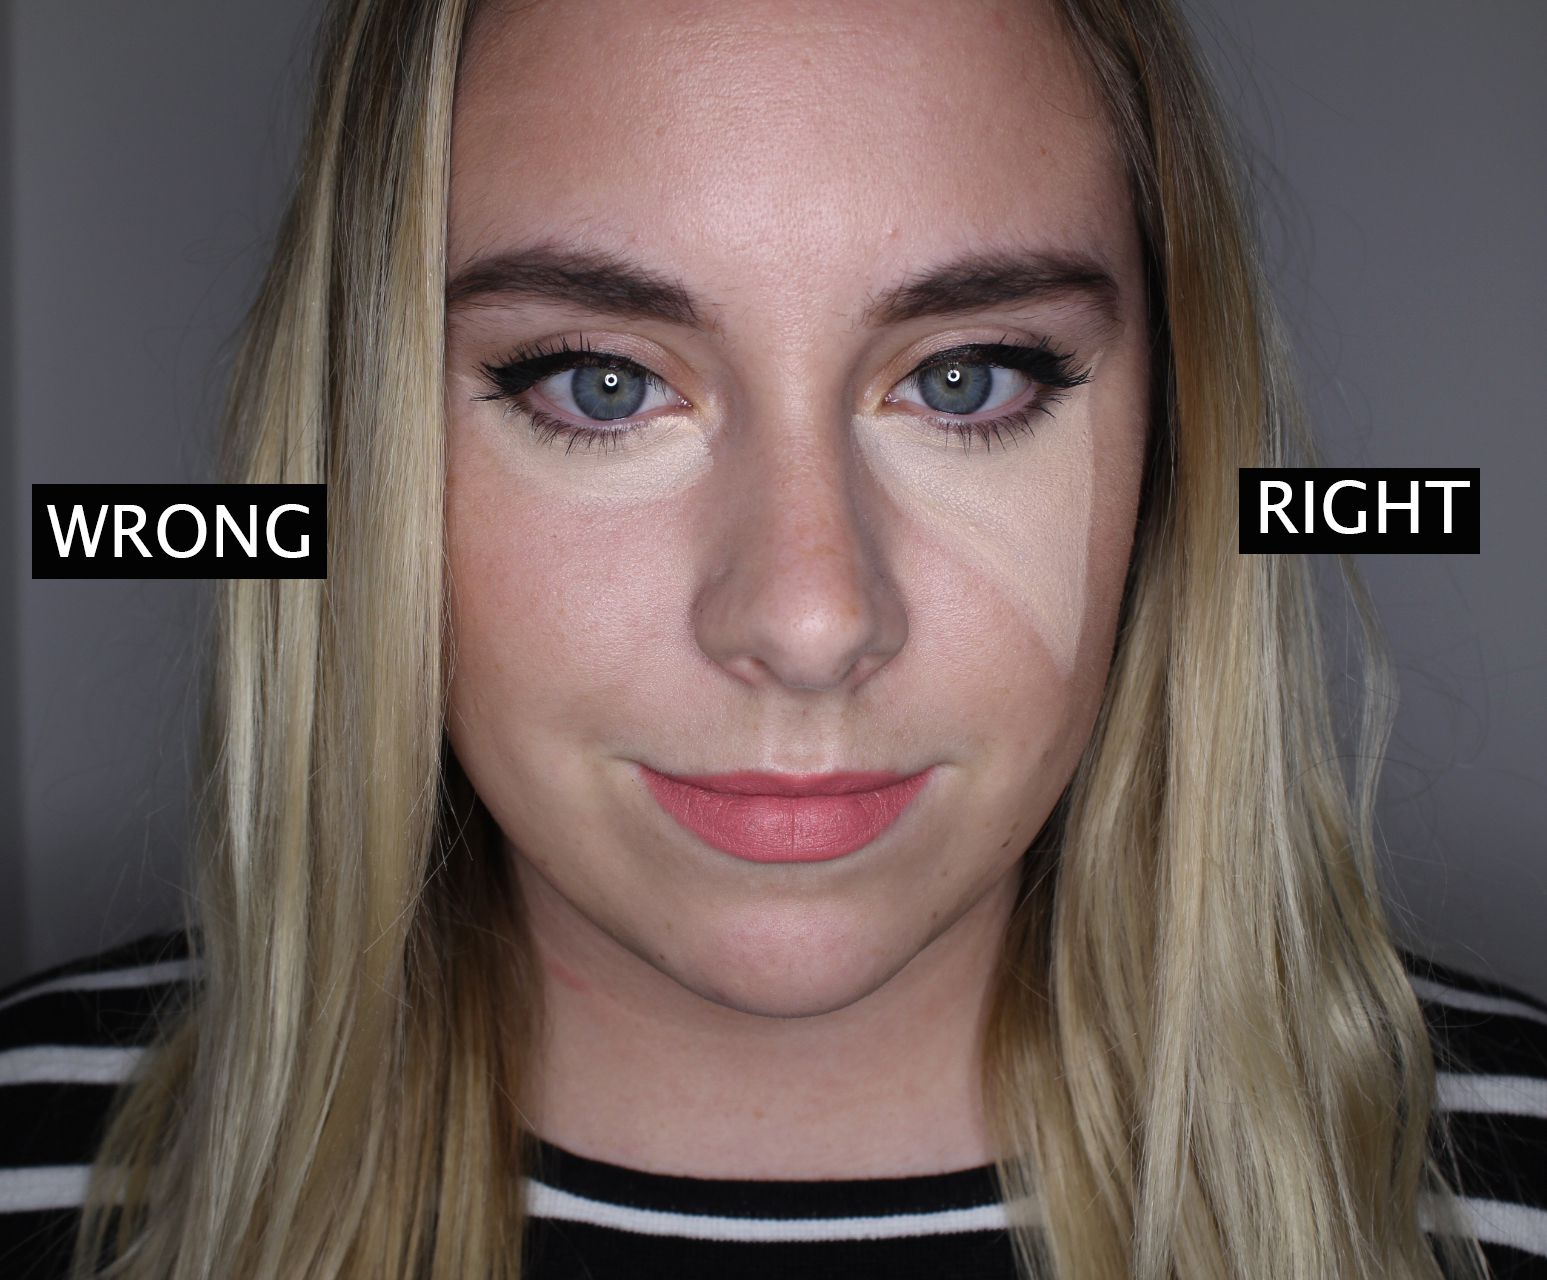 Makeup For Big Eyes How To Make Your Eyes Look Bigger With And Without Makeup 10 Hacks